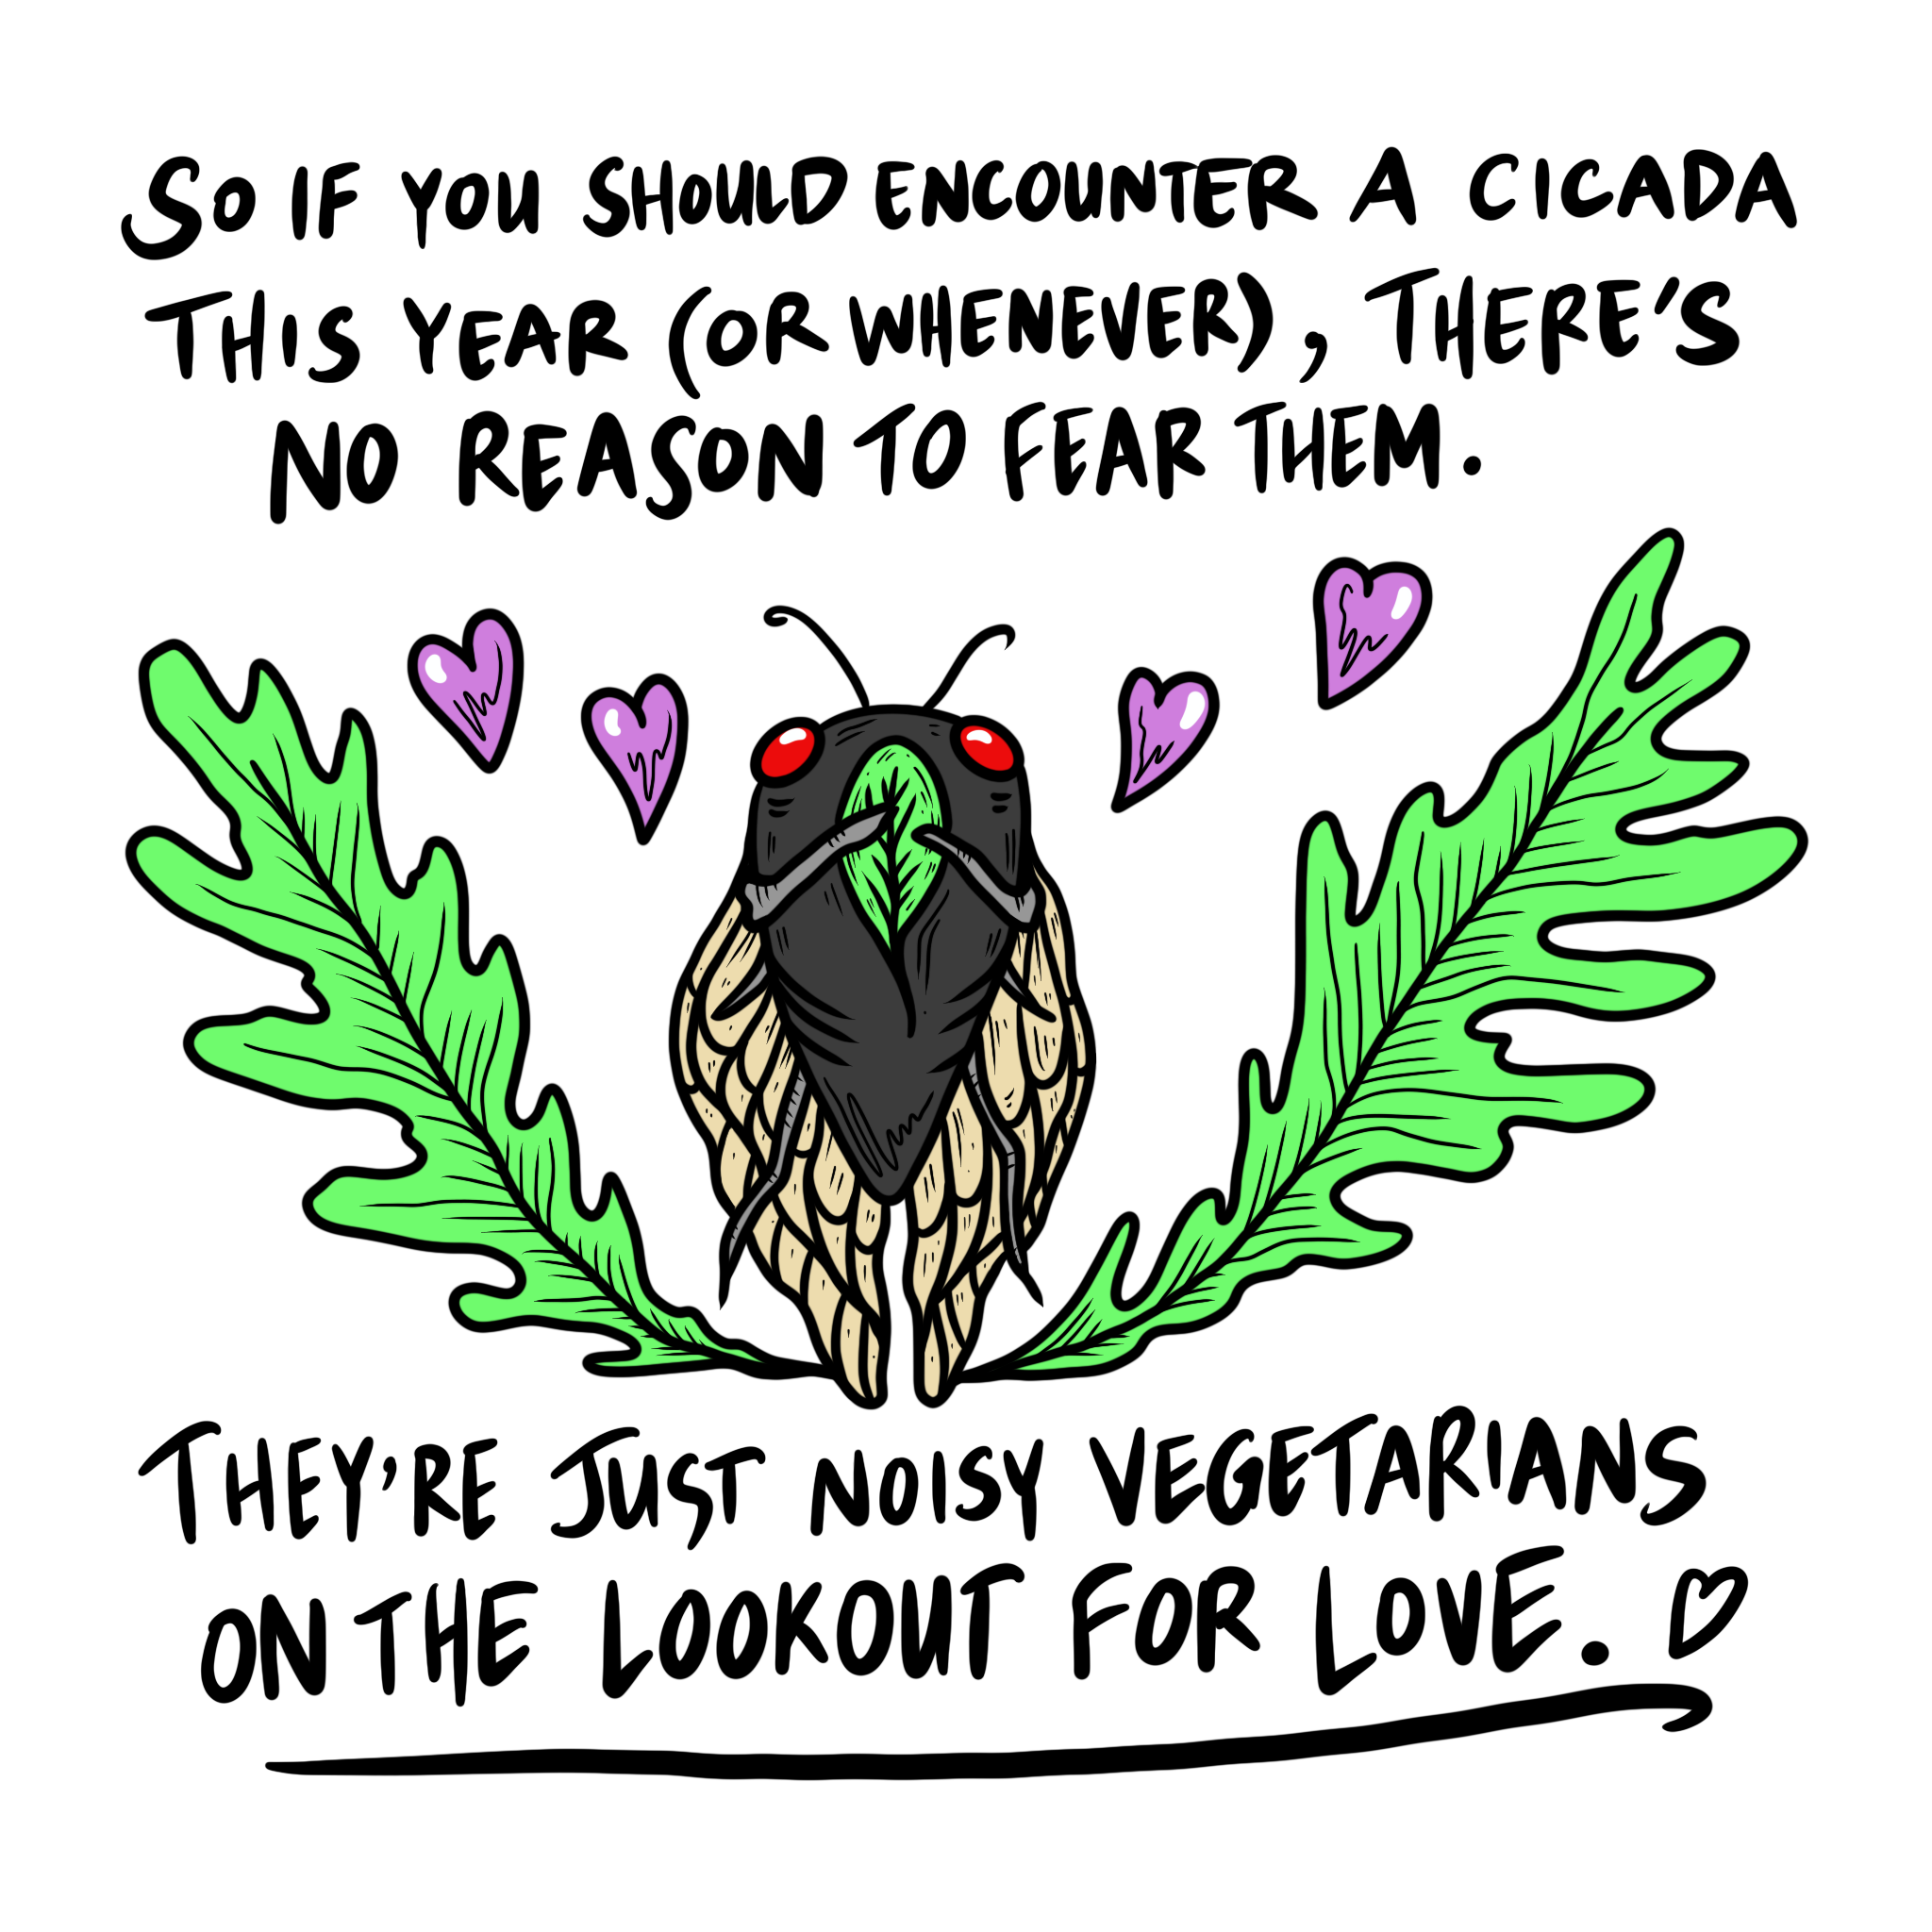 So if you should encounter a cicada this year (or whenever), there’s no reason to fear them. They’re just noisy vegetarians on the lookout for love.